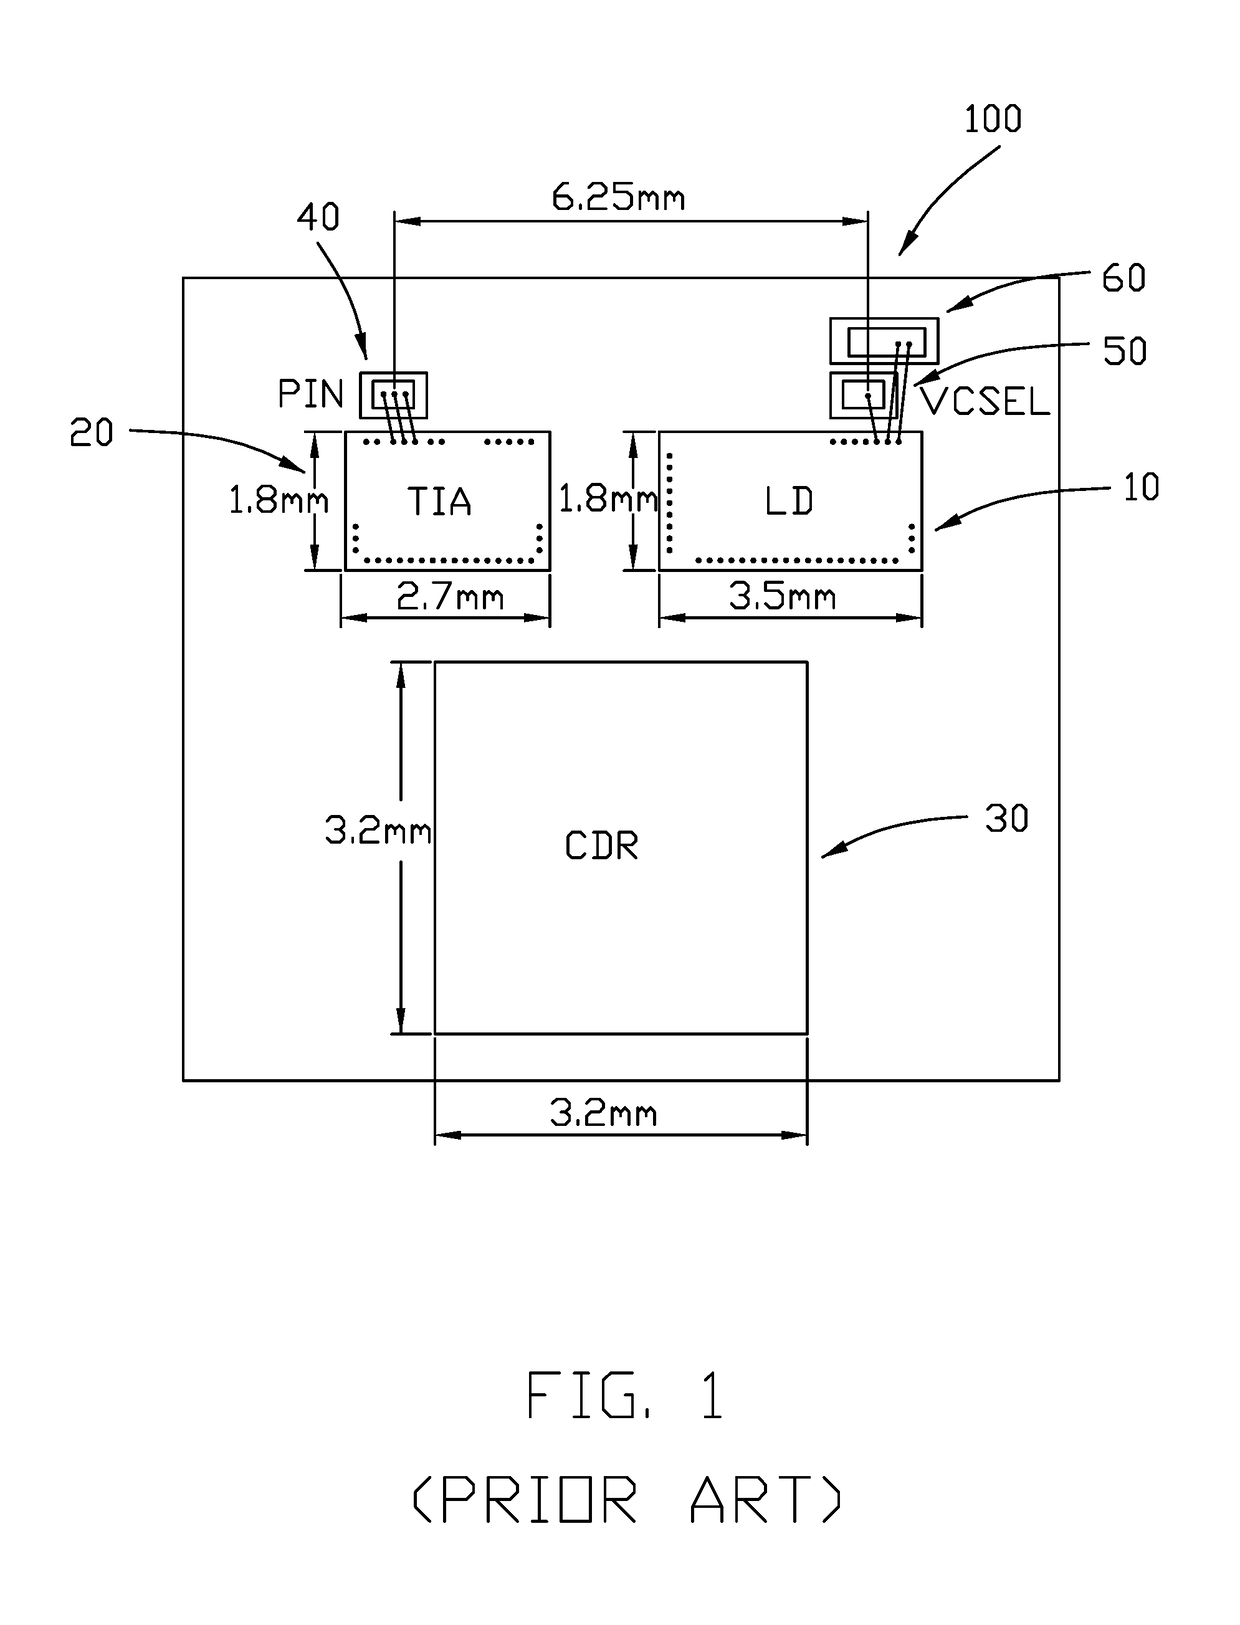 Layout of optical engine components and integrated circuits on a transceiver printed circuit board